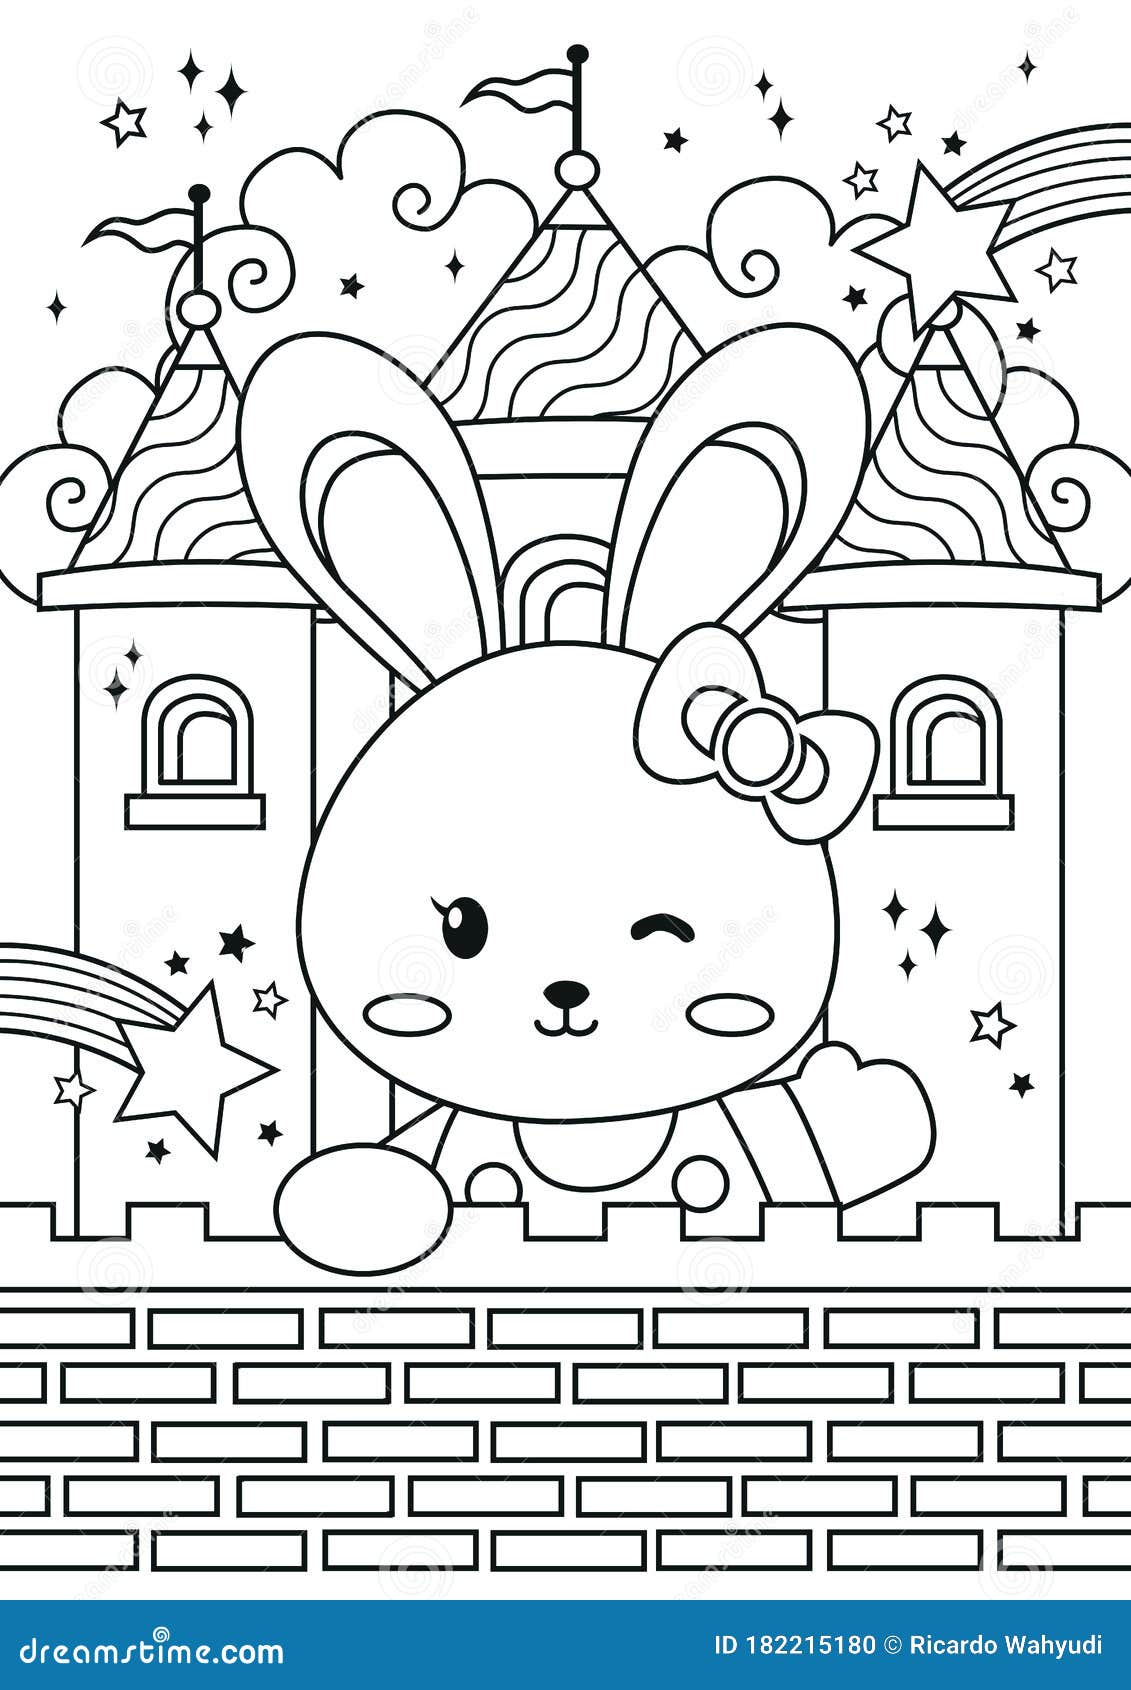 88 Coloring Pages For Bunny Latest HD - Coloring Pages Printable